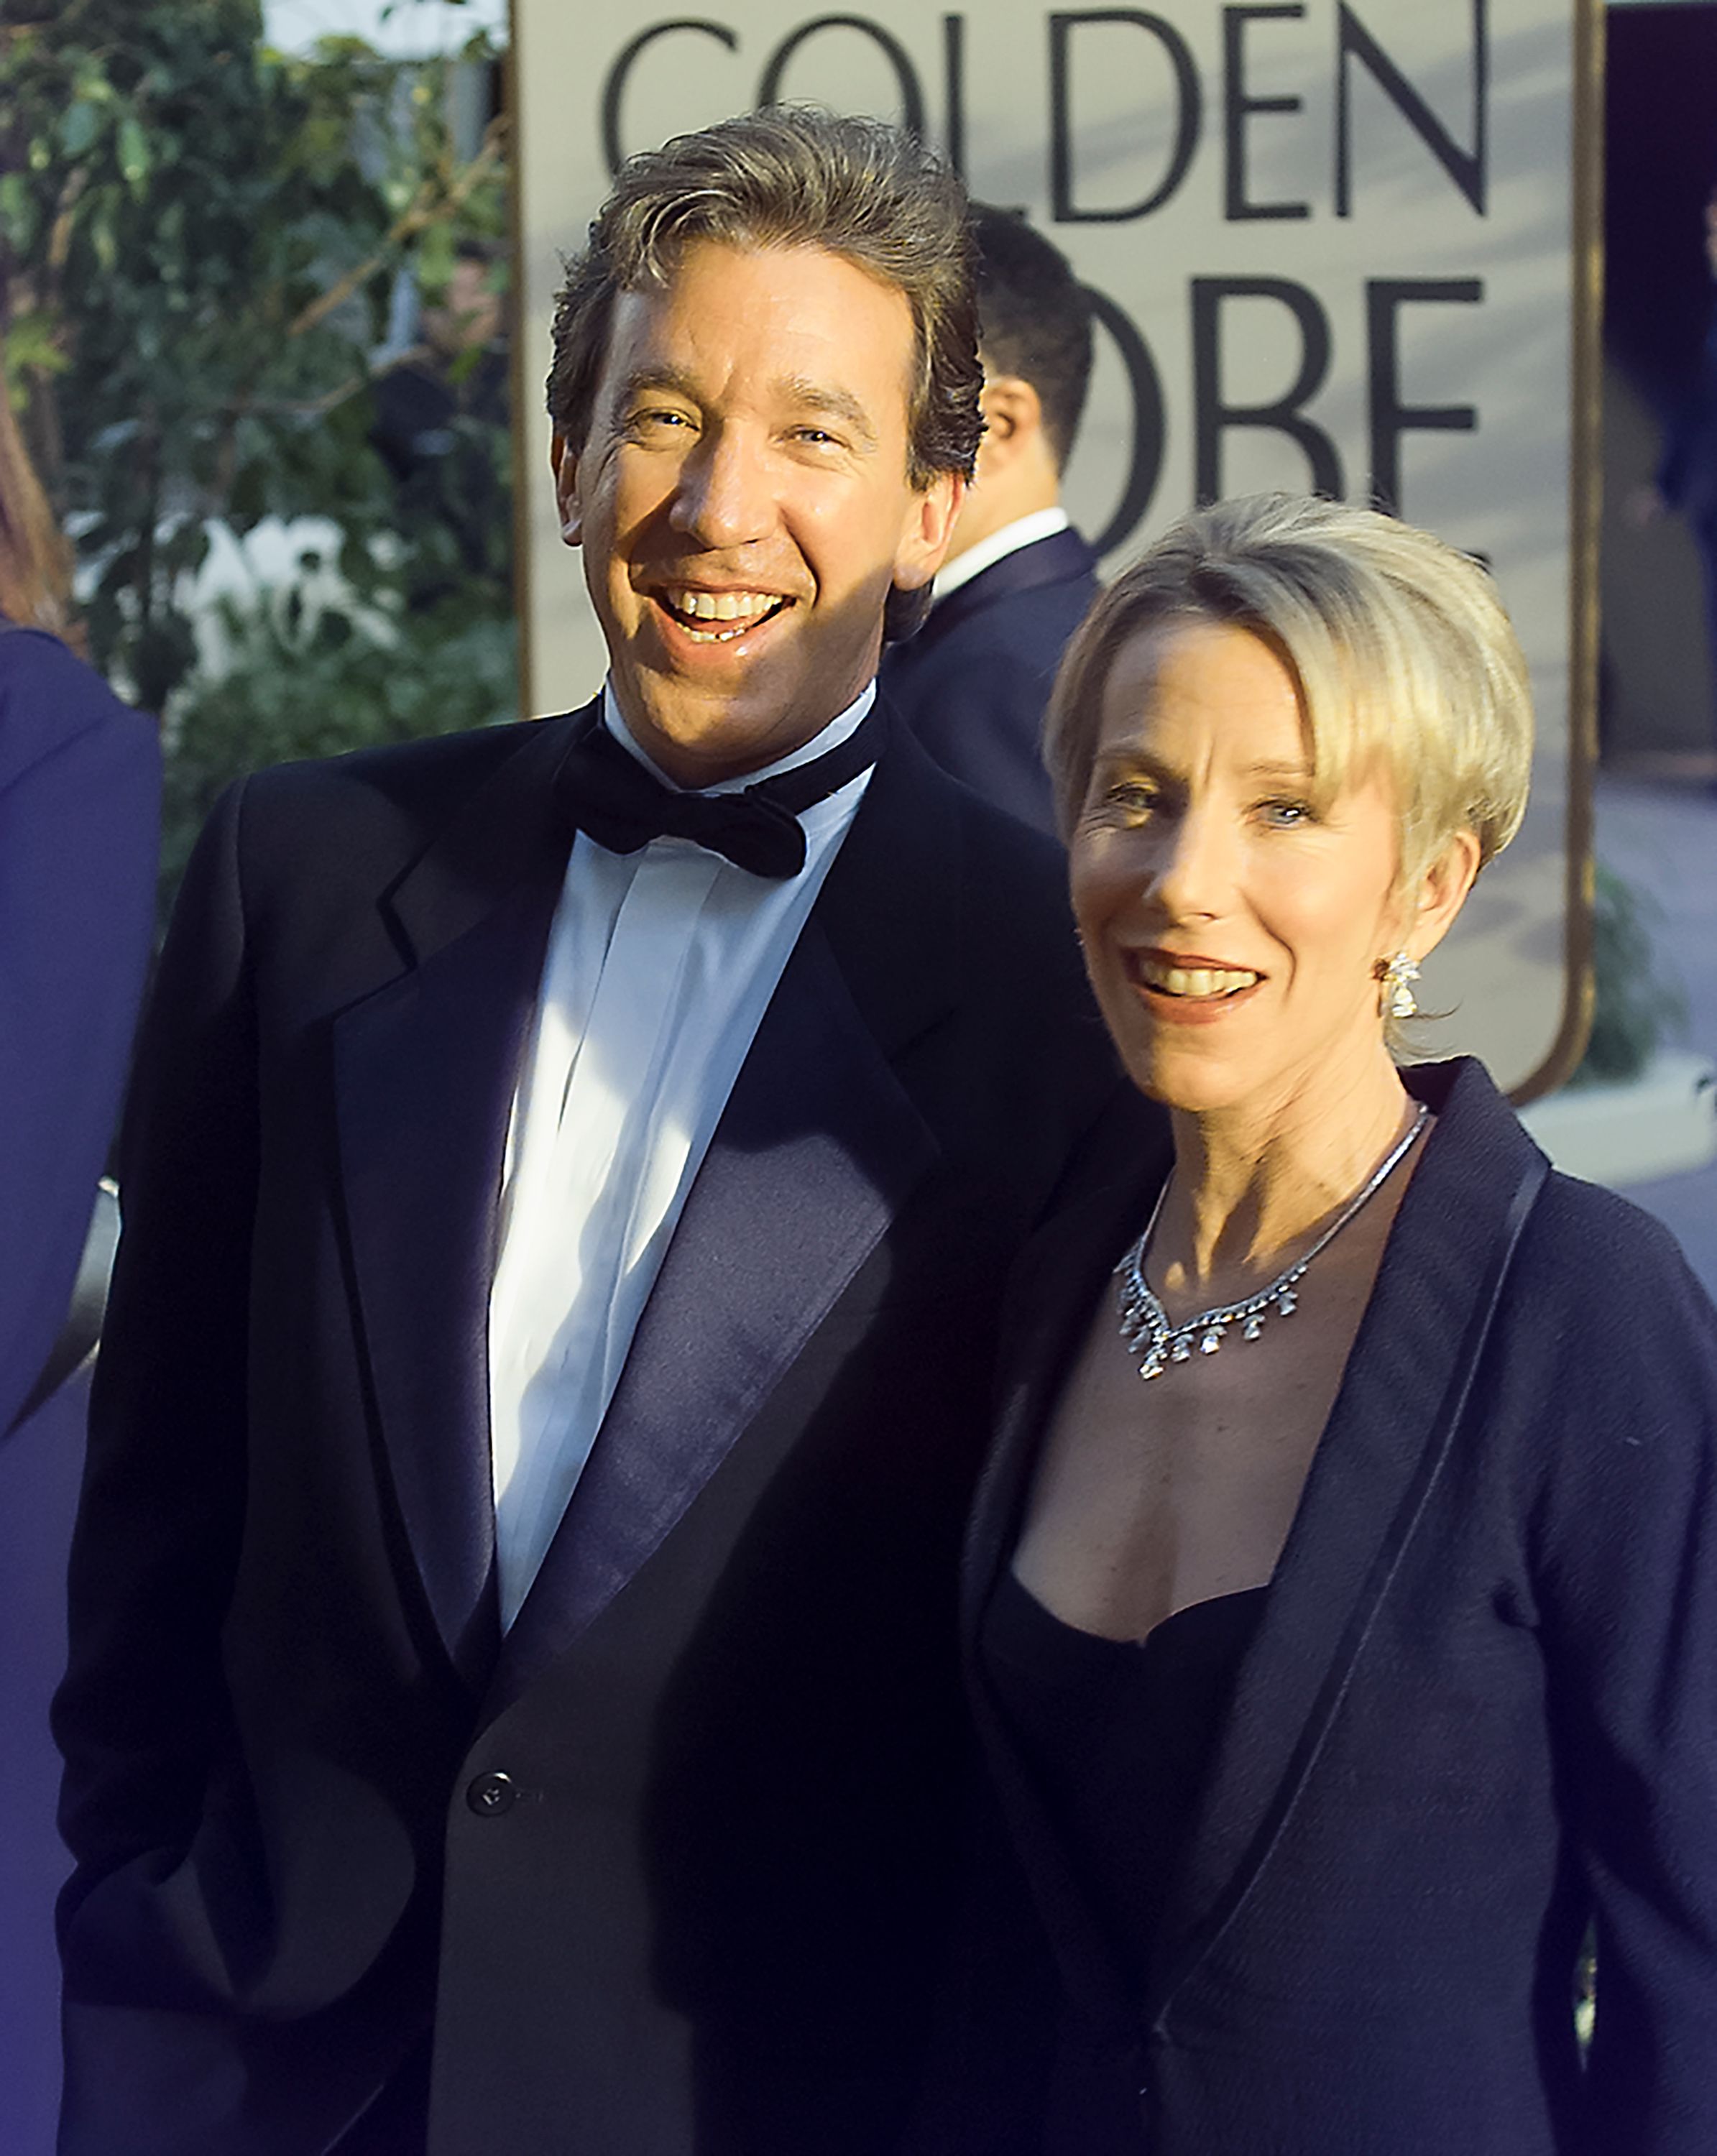 Tim Allen Left Exwife of 15 Years ‘In the Back Seat’ When He Found